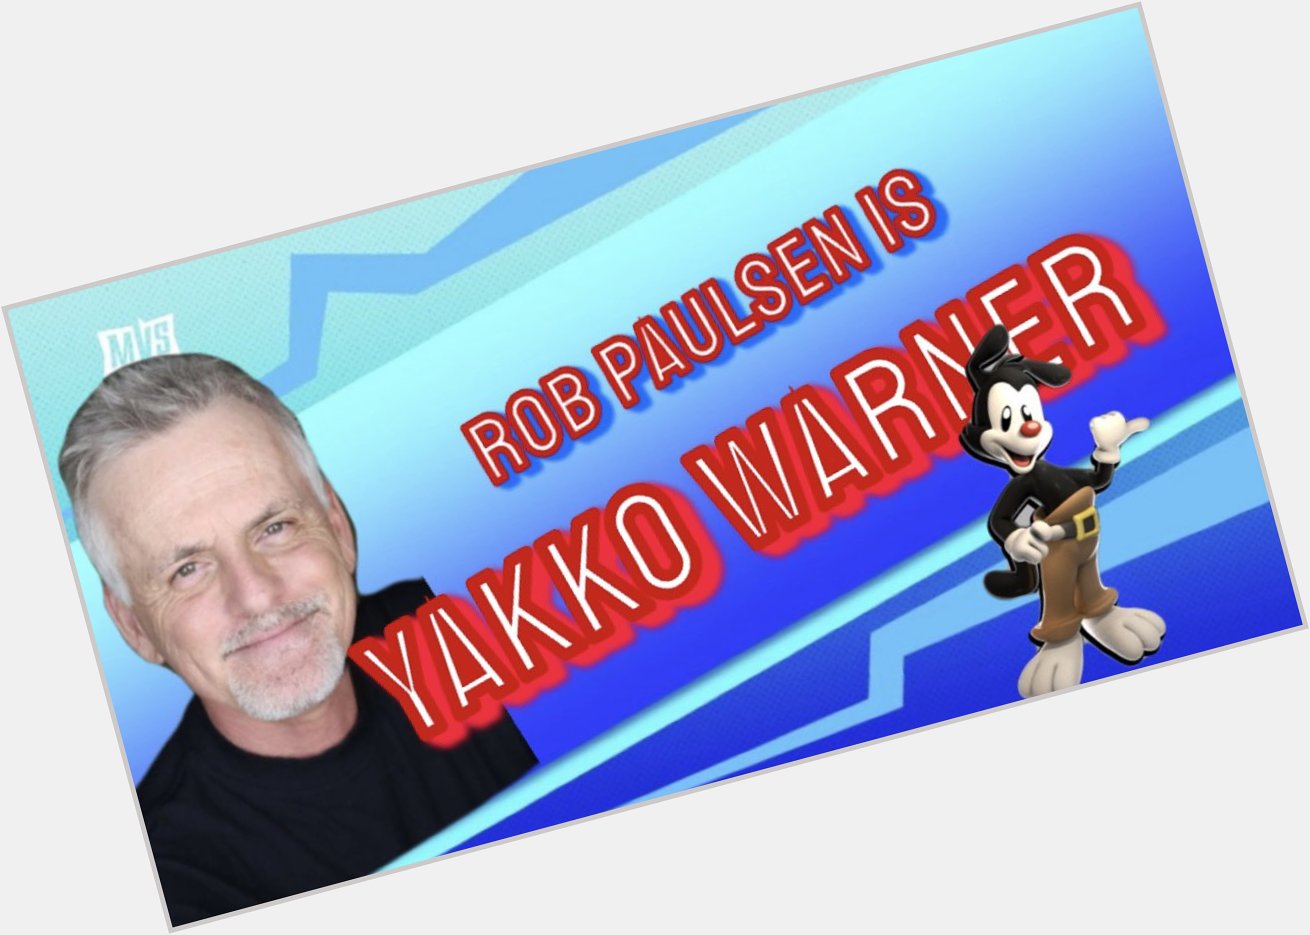 I can t believe i forgot to say this yesterday. But happy (the day after your) birthday rob paulsen! 